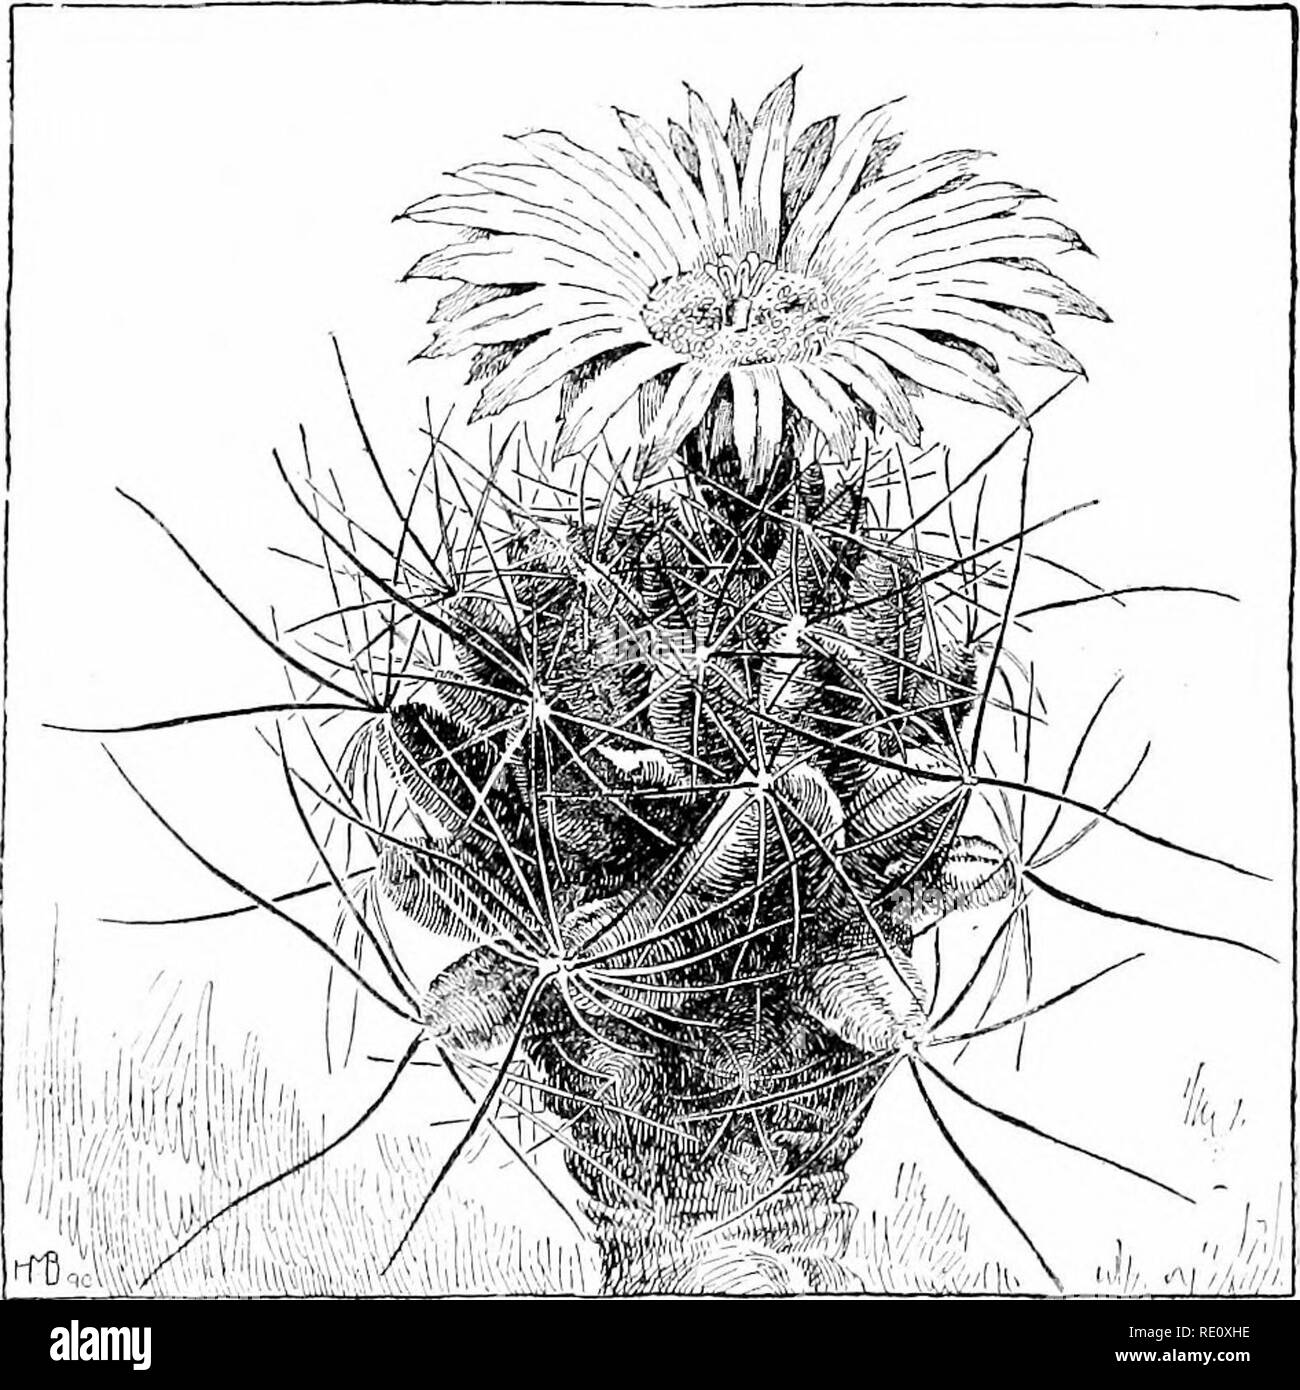 . Cyclopedia of American horticulture, comprising suggestions for cultivation of horticultural plants, descriptions of the species of fruits, vegetables, flowers, and ornamental plants sold in the United States and Canada, together with geographical and biographical sketches. Gardening. 516 ECHIXOCACTUS ECHIXOCACTrS diam.), profusely branched at base: ribs 13-21 (occa- sionally 10): spines 8-15, very stout and compressed, more or less recurved and reddish; radials 4-11, com- paratively slender (the uppermost the most slender), 1-2 in. long; the 4 centrals much stouter and longer (IK to two and Stock Photo